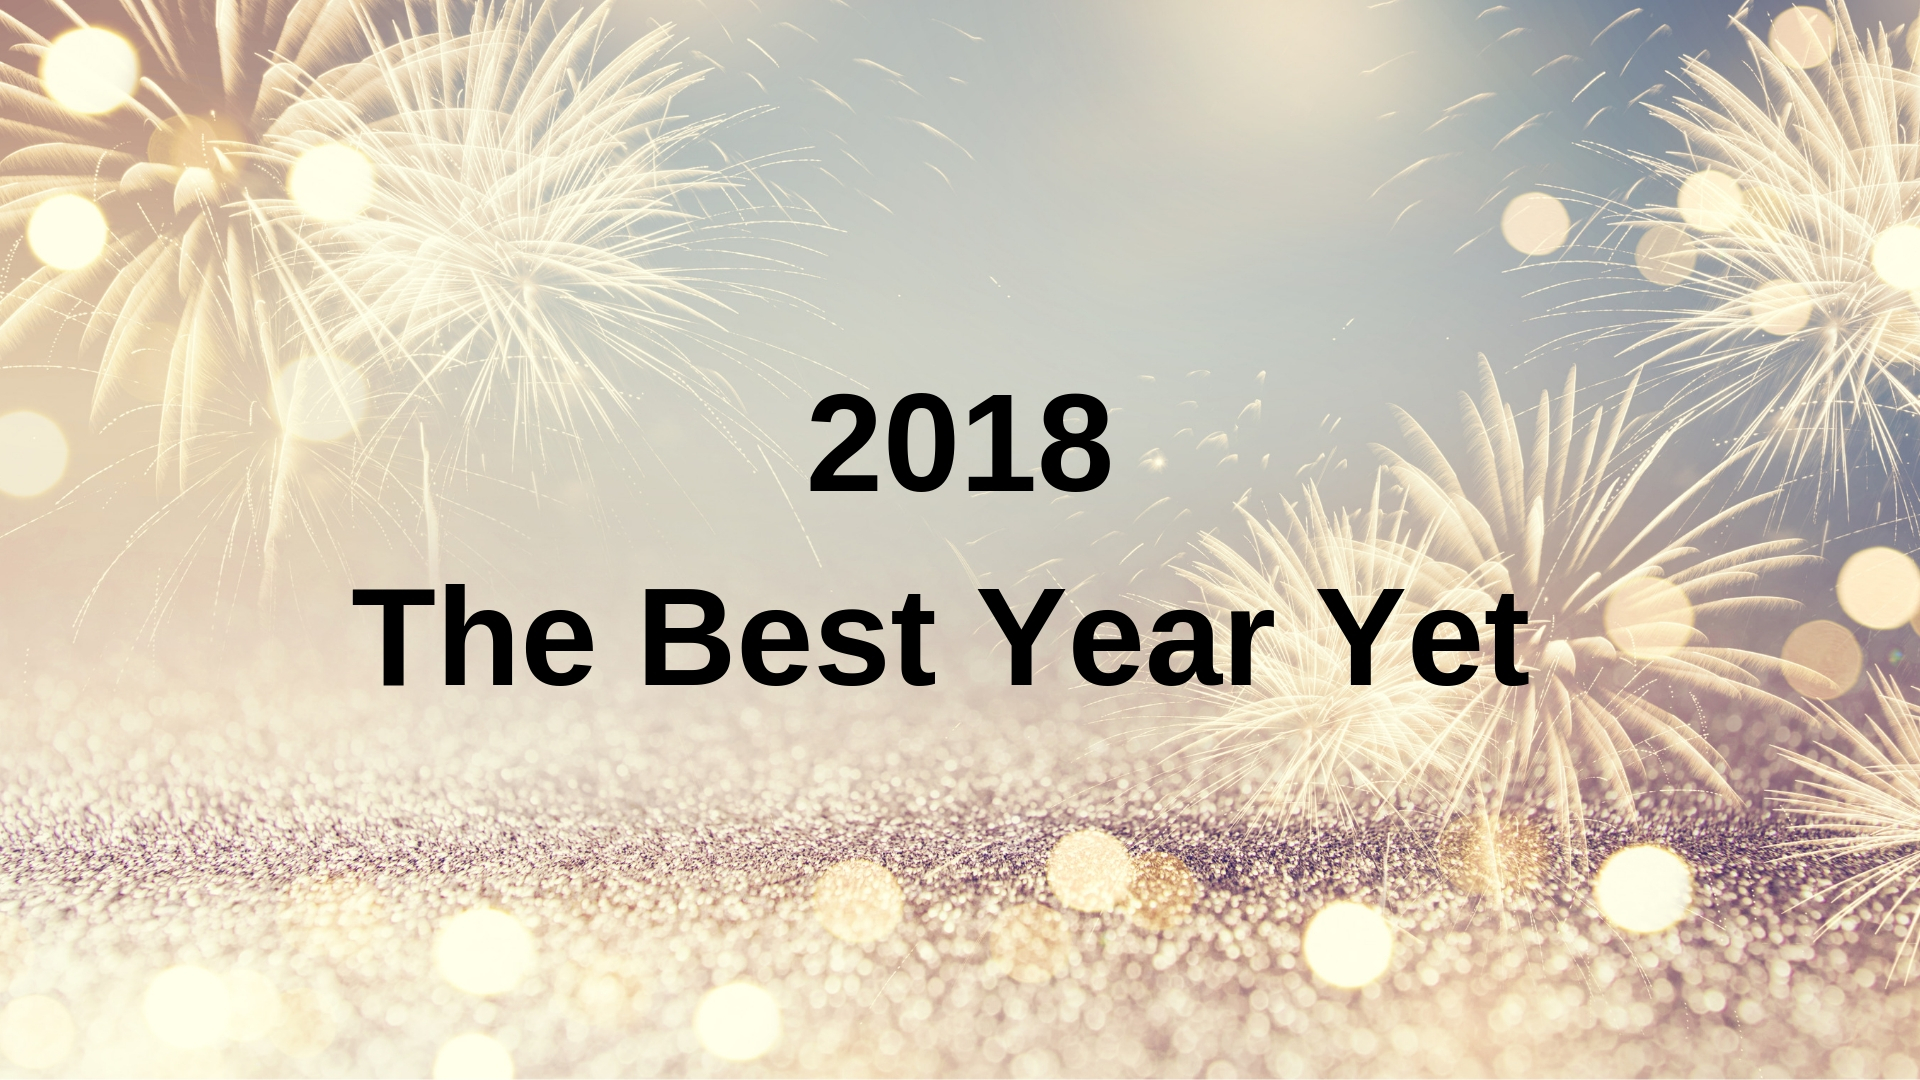 2018 The Best Year Yet